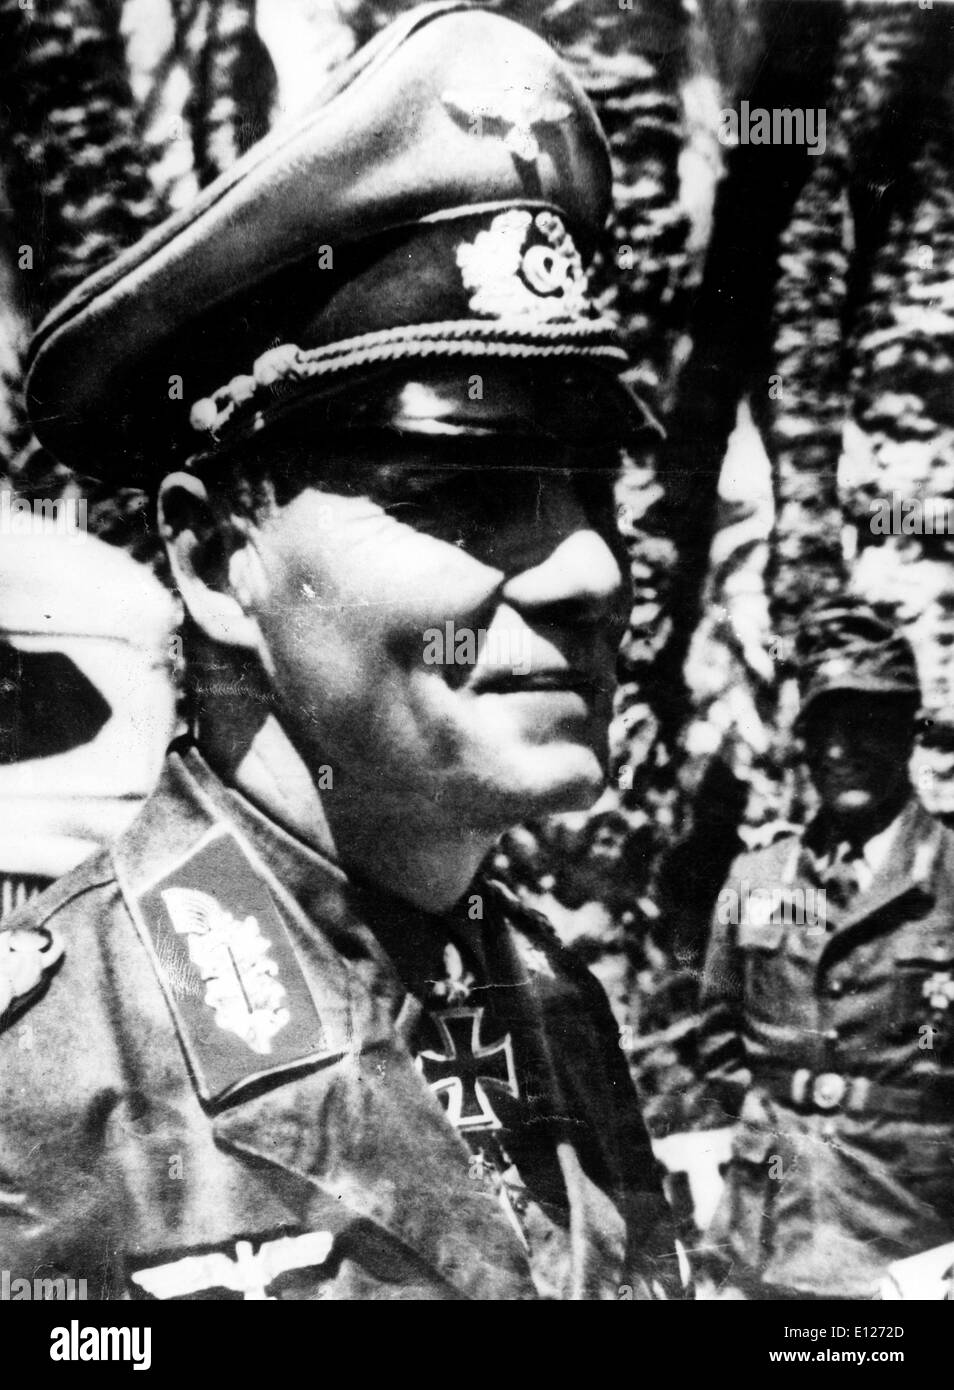 Apr 01, 2009 - London, England, United Kingdom - Erwin Johannes Eugen Rommel (15 November 1891 Ð 14 October 1944) (also known as the 'Desert Fox') was perhaps the most famous German Field Marshal of World War II. He was the commander of the Deutsches Afrikakorps and became known for the skillful military campaigns he waged on behalf of the German Army in North Africa. He was later in command of the German forces opposing the Allied cross-channel invasion at Normandy. He is thought by many to have been the most skilled commander of desert warfare in World War II Stock Photo